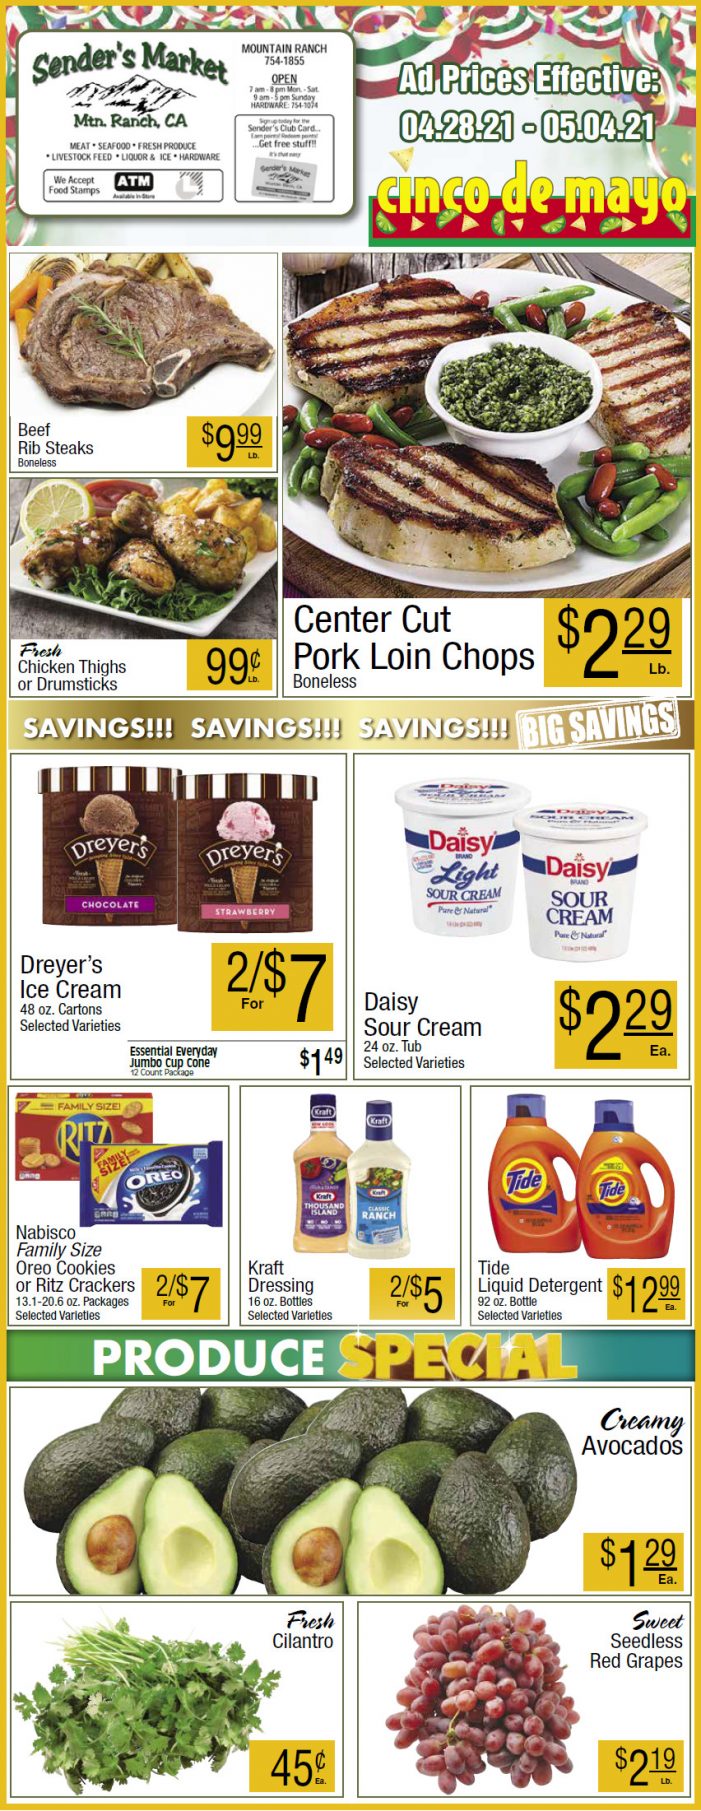 Sender’s Market’s Weekly Ad & Grocery Specials Through May 5th.  Shop Local & Save!